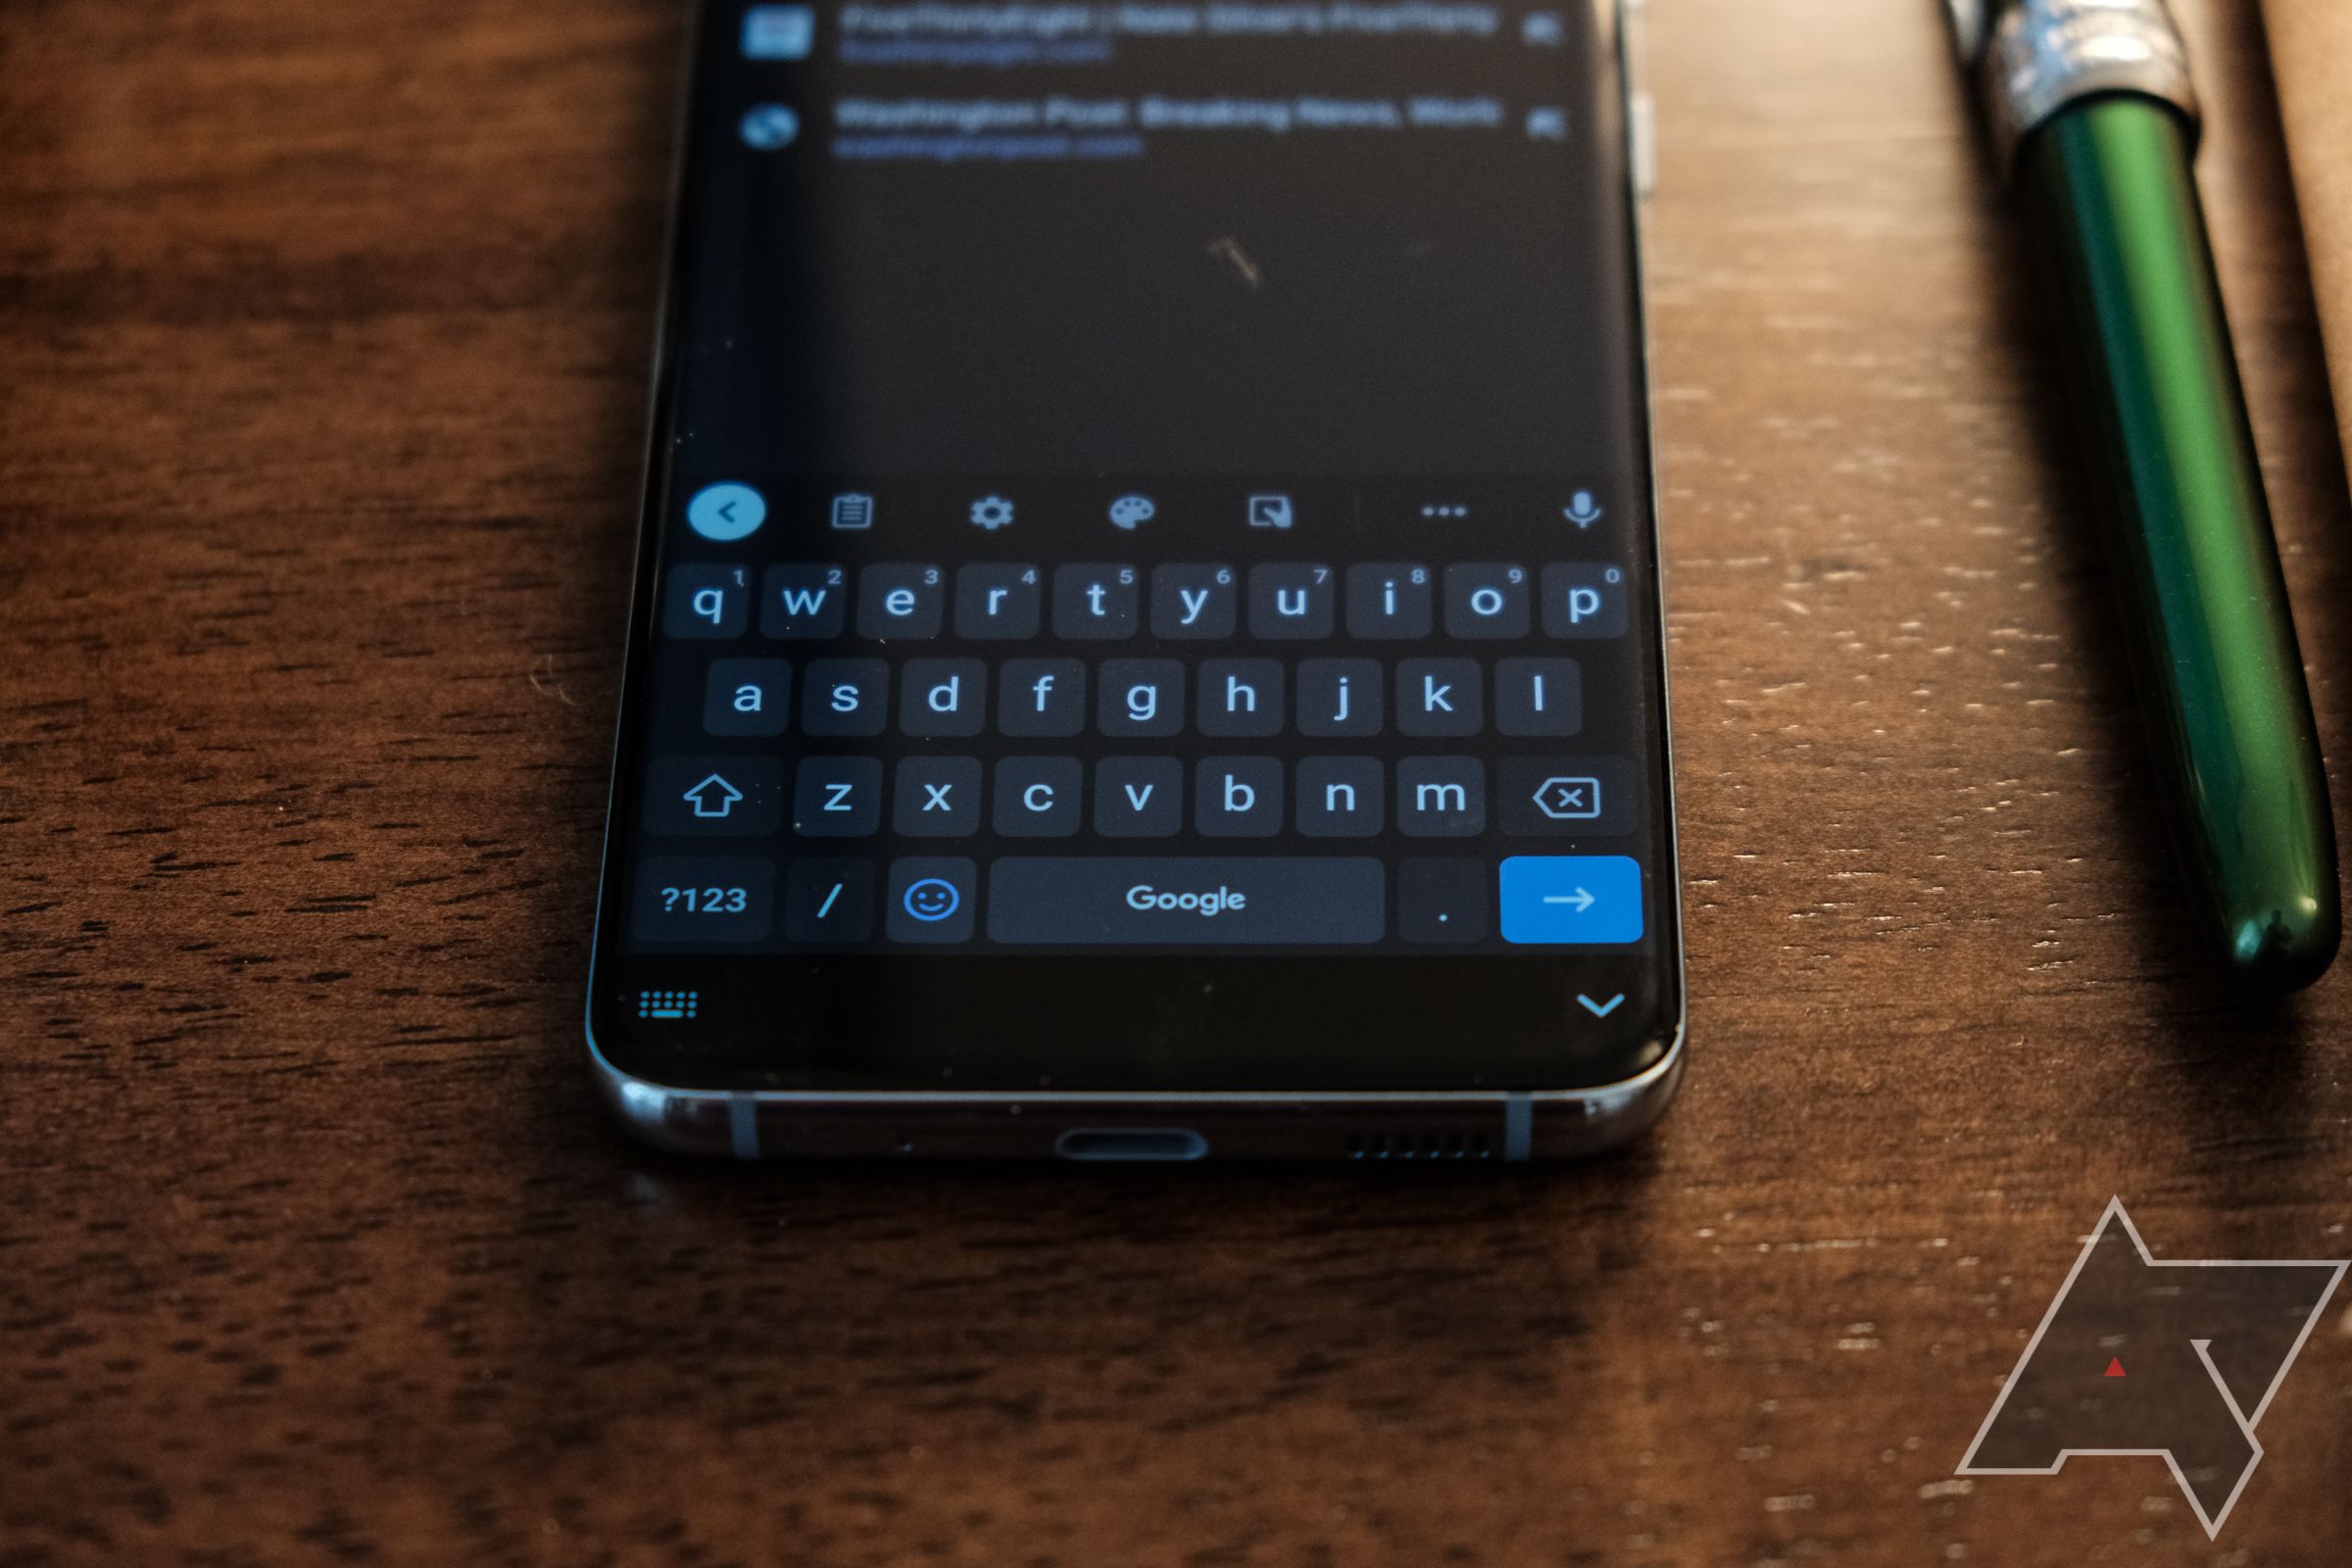 8 simple Samsung Keyboard tips to improve your speed and accuracy